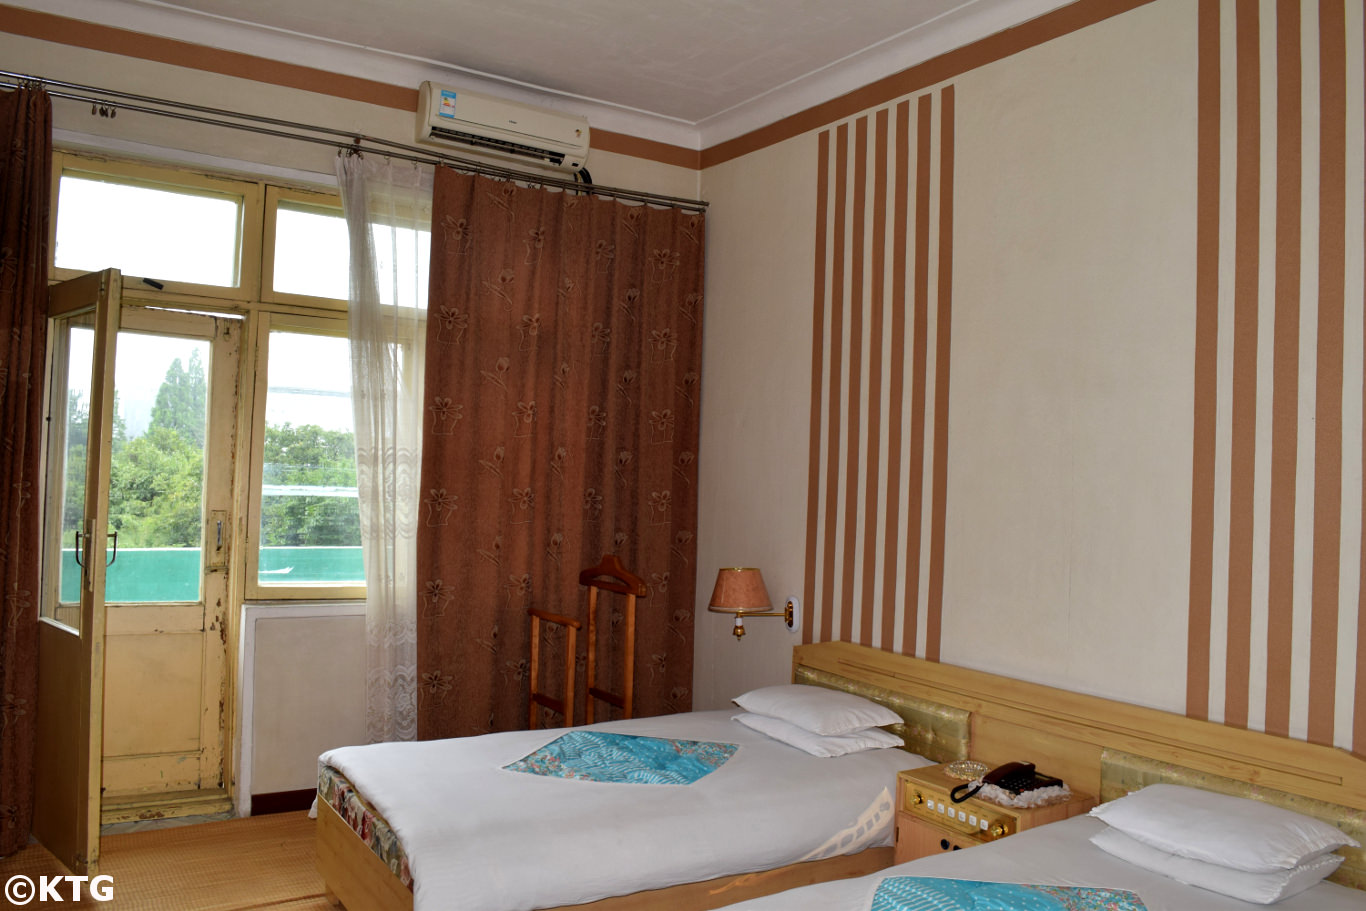 Room at the Songdowon Hotel in Wonsan city, Kangwon province, North Korea (DPRK). Trip arranged by KTG Tours